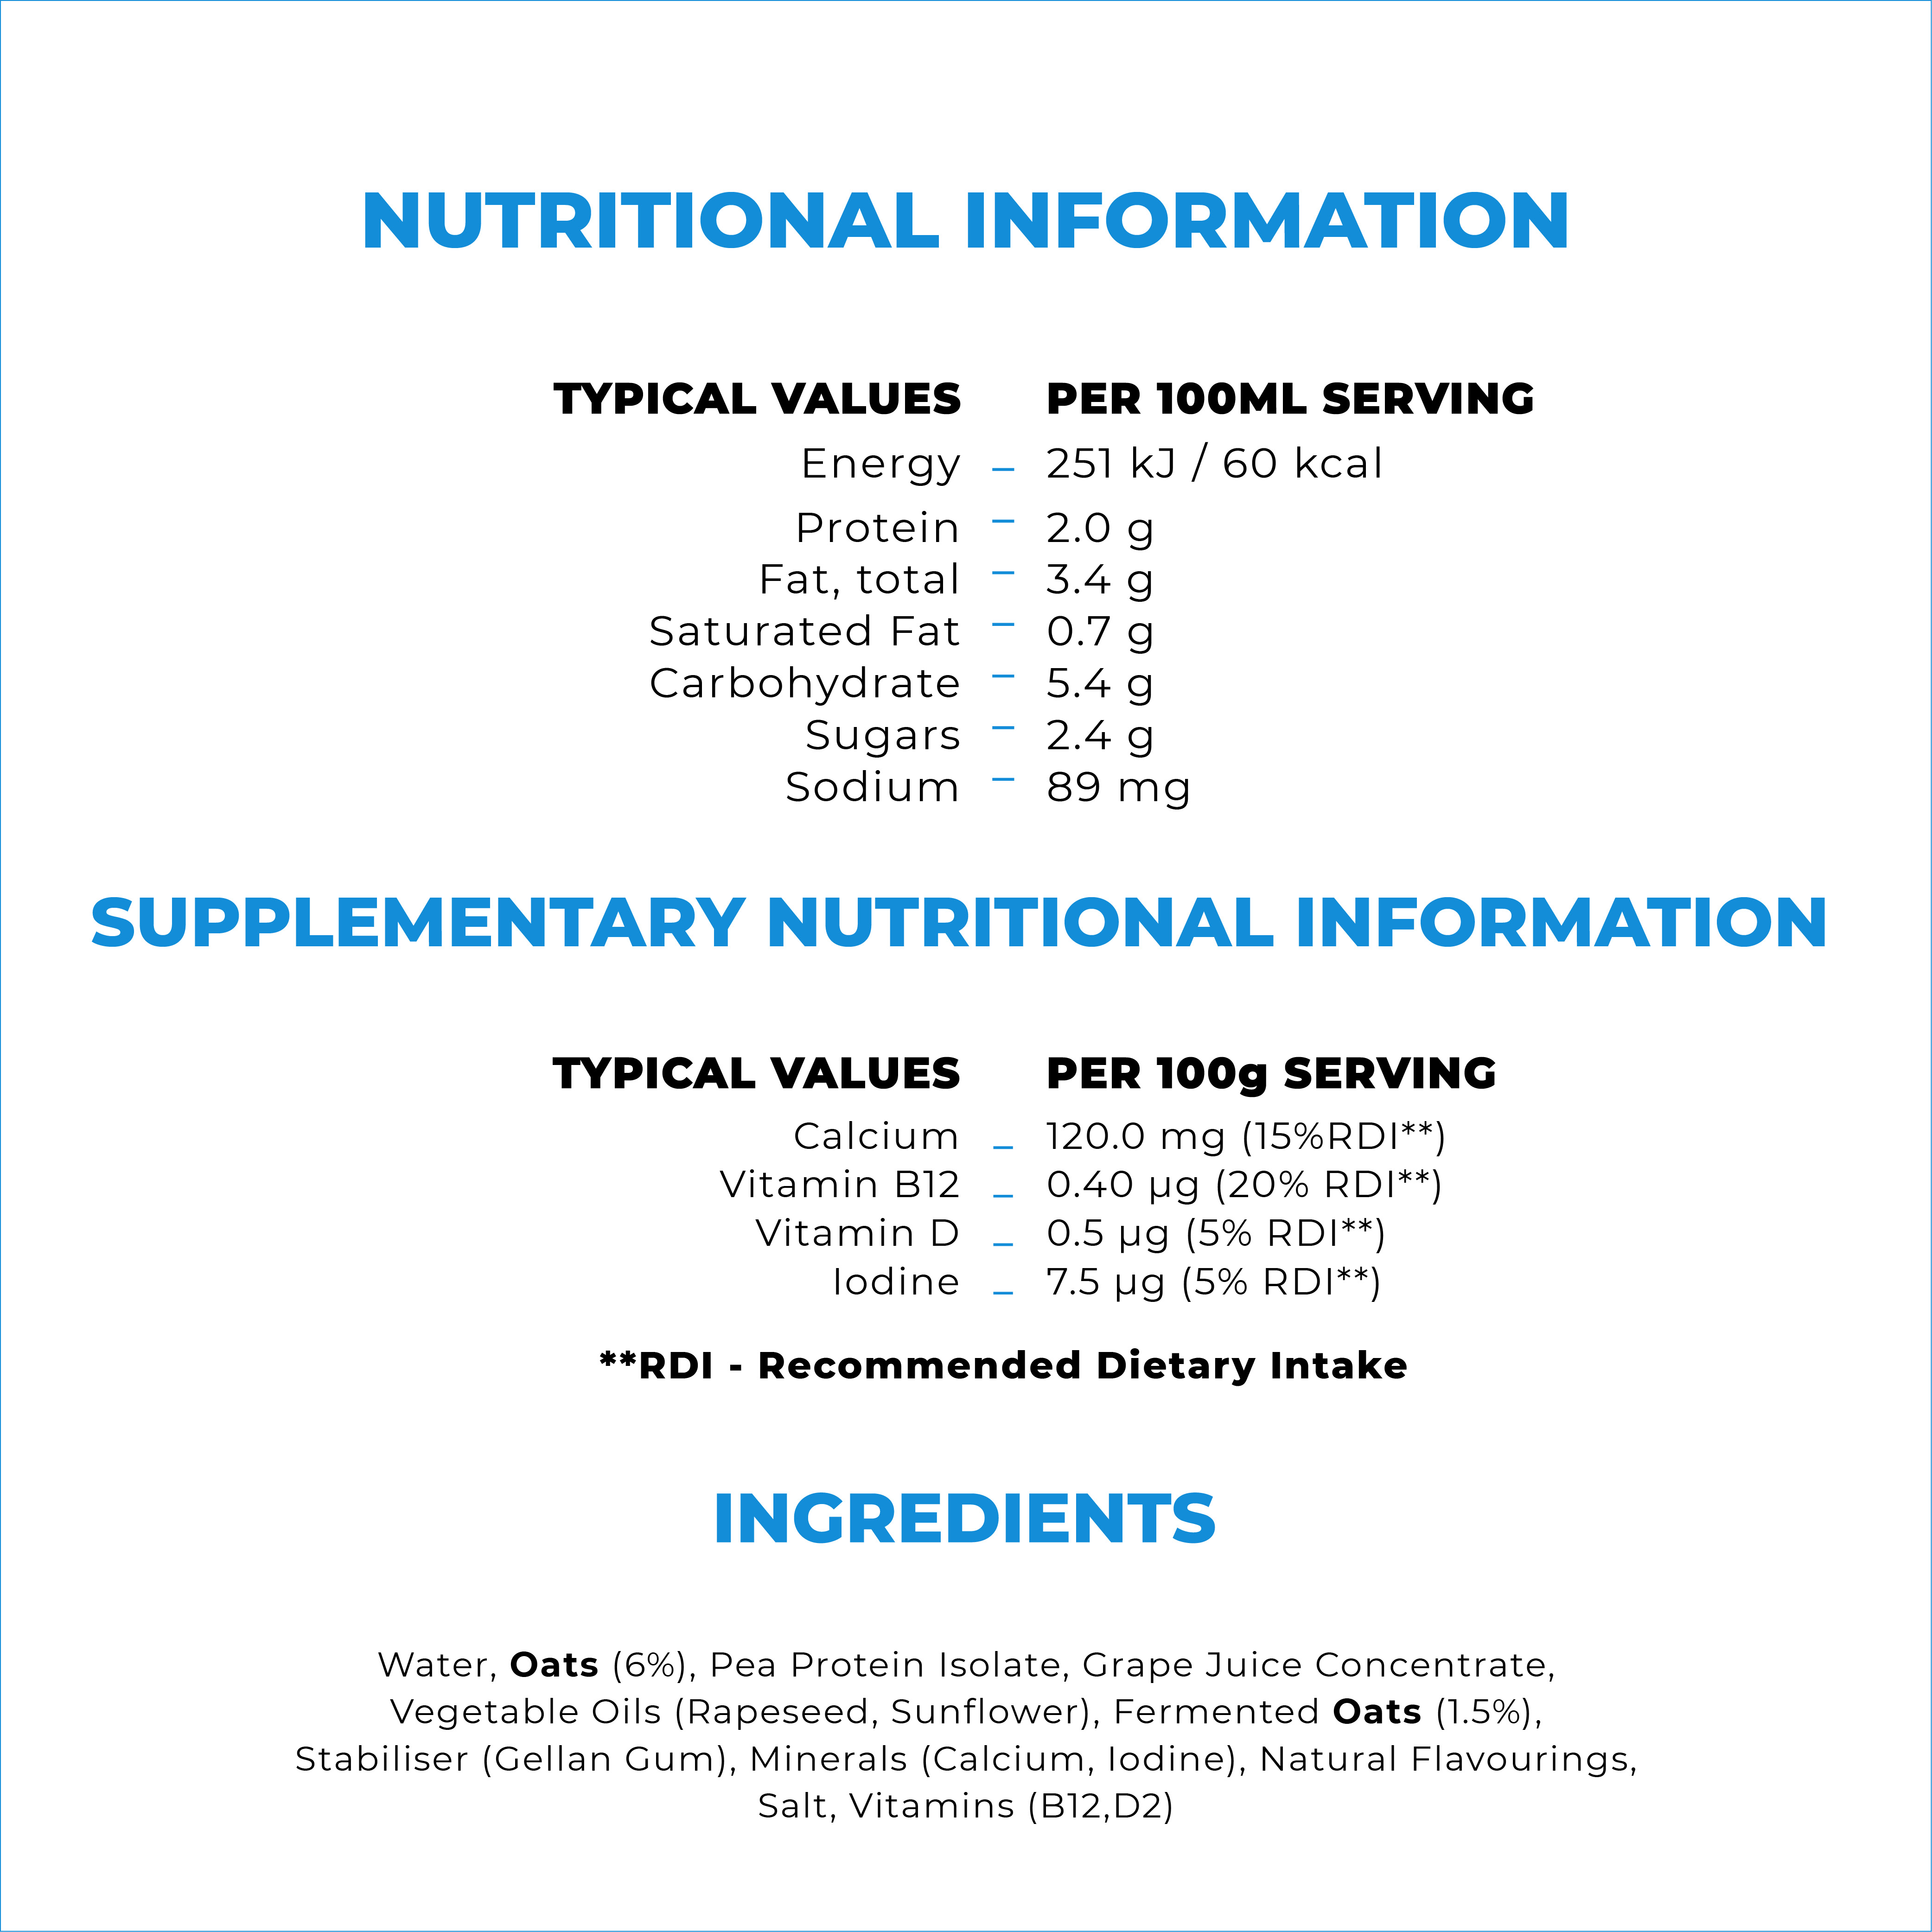 

                                  TYPICAL VALUES Energy Protein Fat, total Saturated Fat Carbohydrate Sugars Sodium 
                                  PER 100ML SERVING - 251 kJ / 60 kcal - 2.0 g - 3.4 g - 0.7 g - 5.4 g - 2.4 g - 89 mg 
                                  CUPPLEMENTARY NUTRITIONAL INFORMATION 
                                  TYPICAL VALUES Calcium Vitamin B12 Vitamin D Iodine 
                                  PER 100g SERVING _ 120.0 mg (15%RDI**) _ 0.40 pg (20% RDI**) - 0.5 pg (5% RDI**) _ 7.5 pg (5% RDI**) 
                                  **RDI - Recommended Dietary Intake 

                                  Water, Oats (6%), Pea Protein Isolate, Grape Juice Concentrate, Vegetable Oils (Rapeseed, Sunflower), Fermented Oats (1.5%), Stabiliser (Gellan Gum), Minerals (Calcium, Iodine), Natural Flavourings, Salt, Vitamins (B12,D2) 

                                  